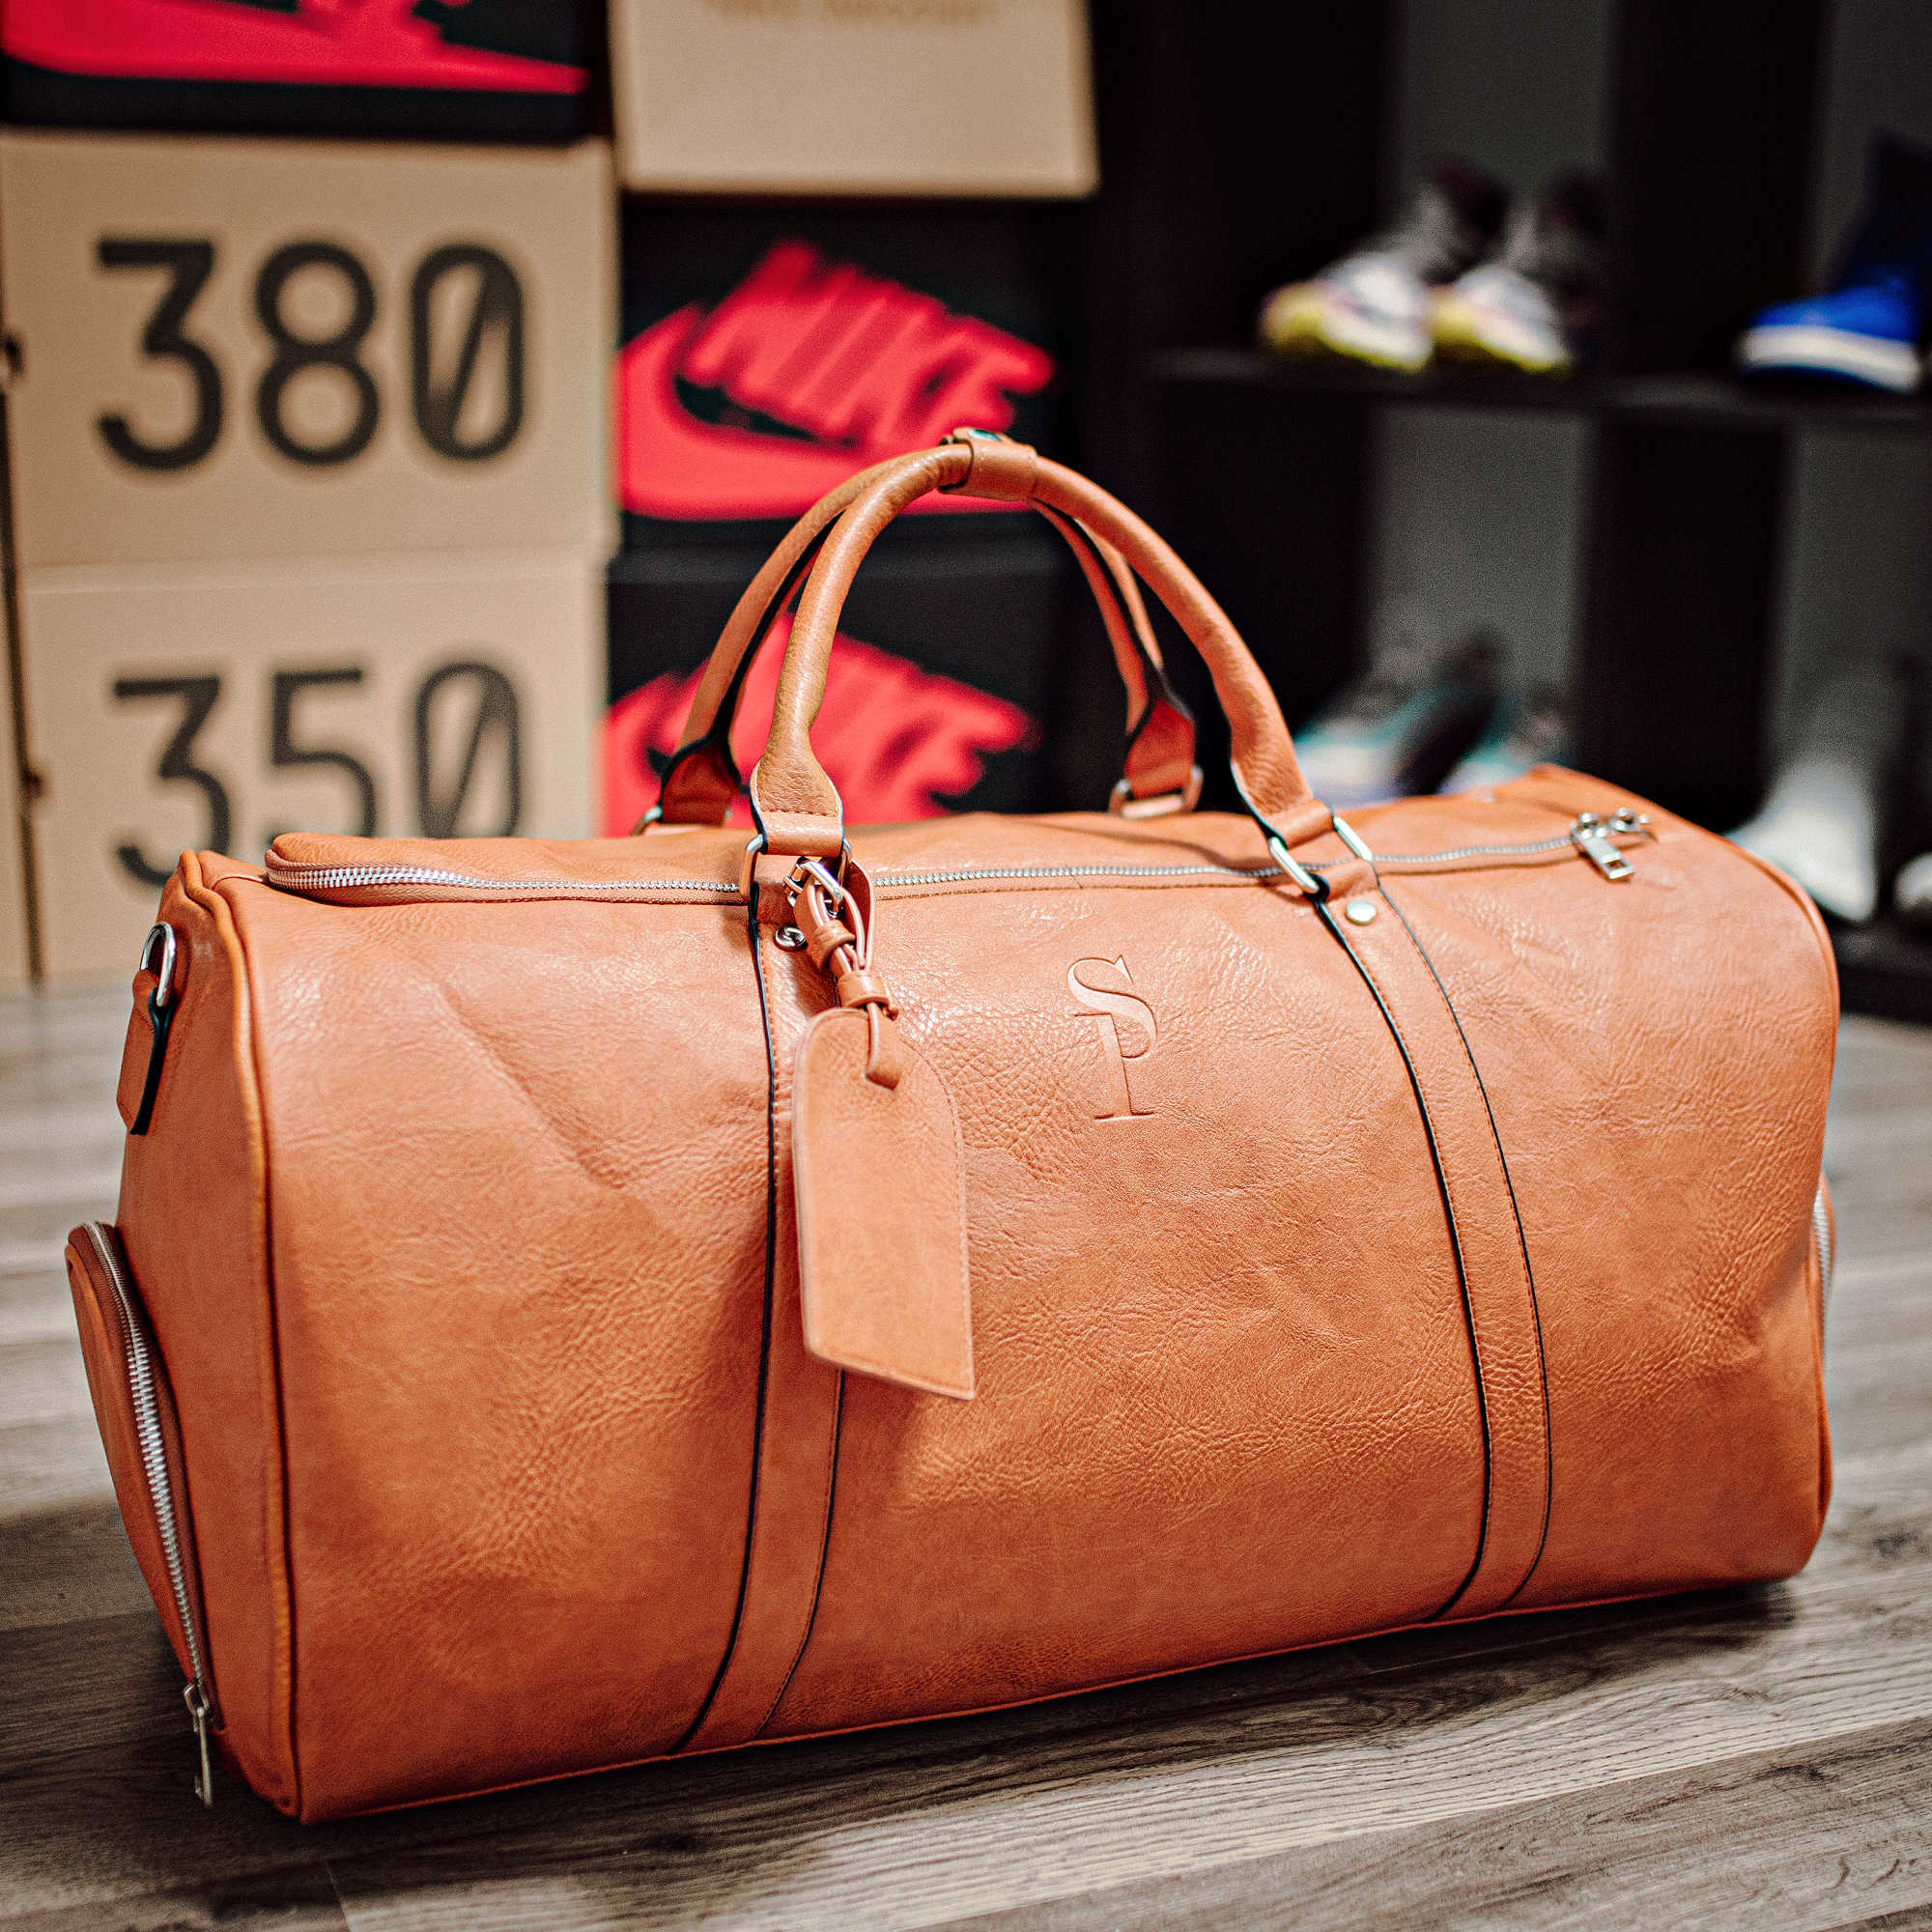 Brown Tumbled Leather 2 Bag Set (Commuter and Duffle)